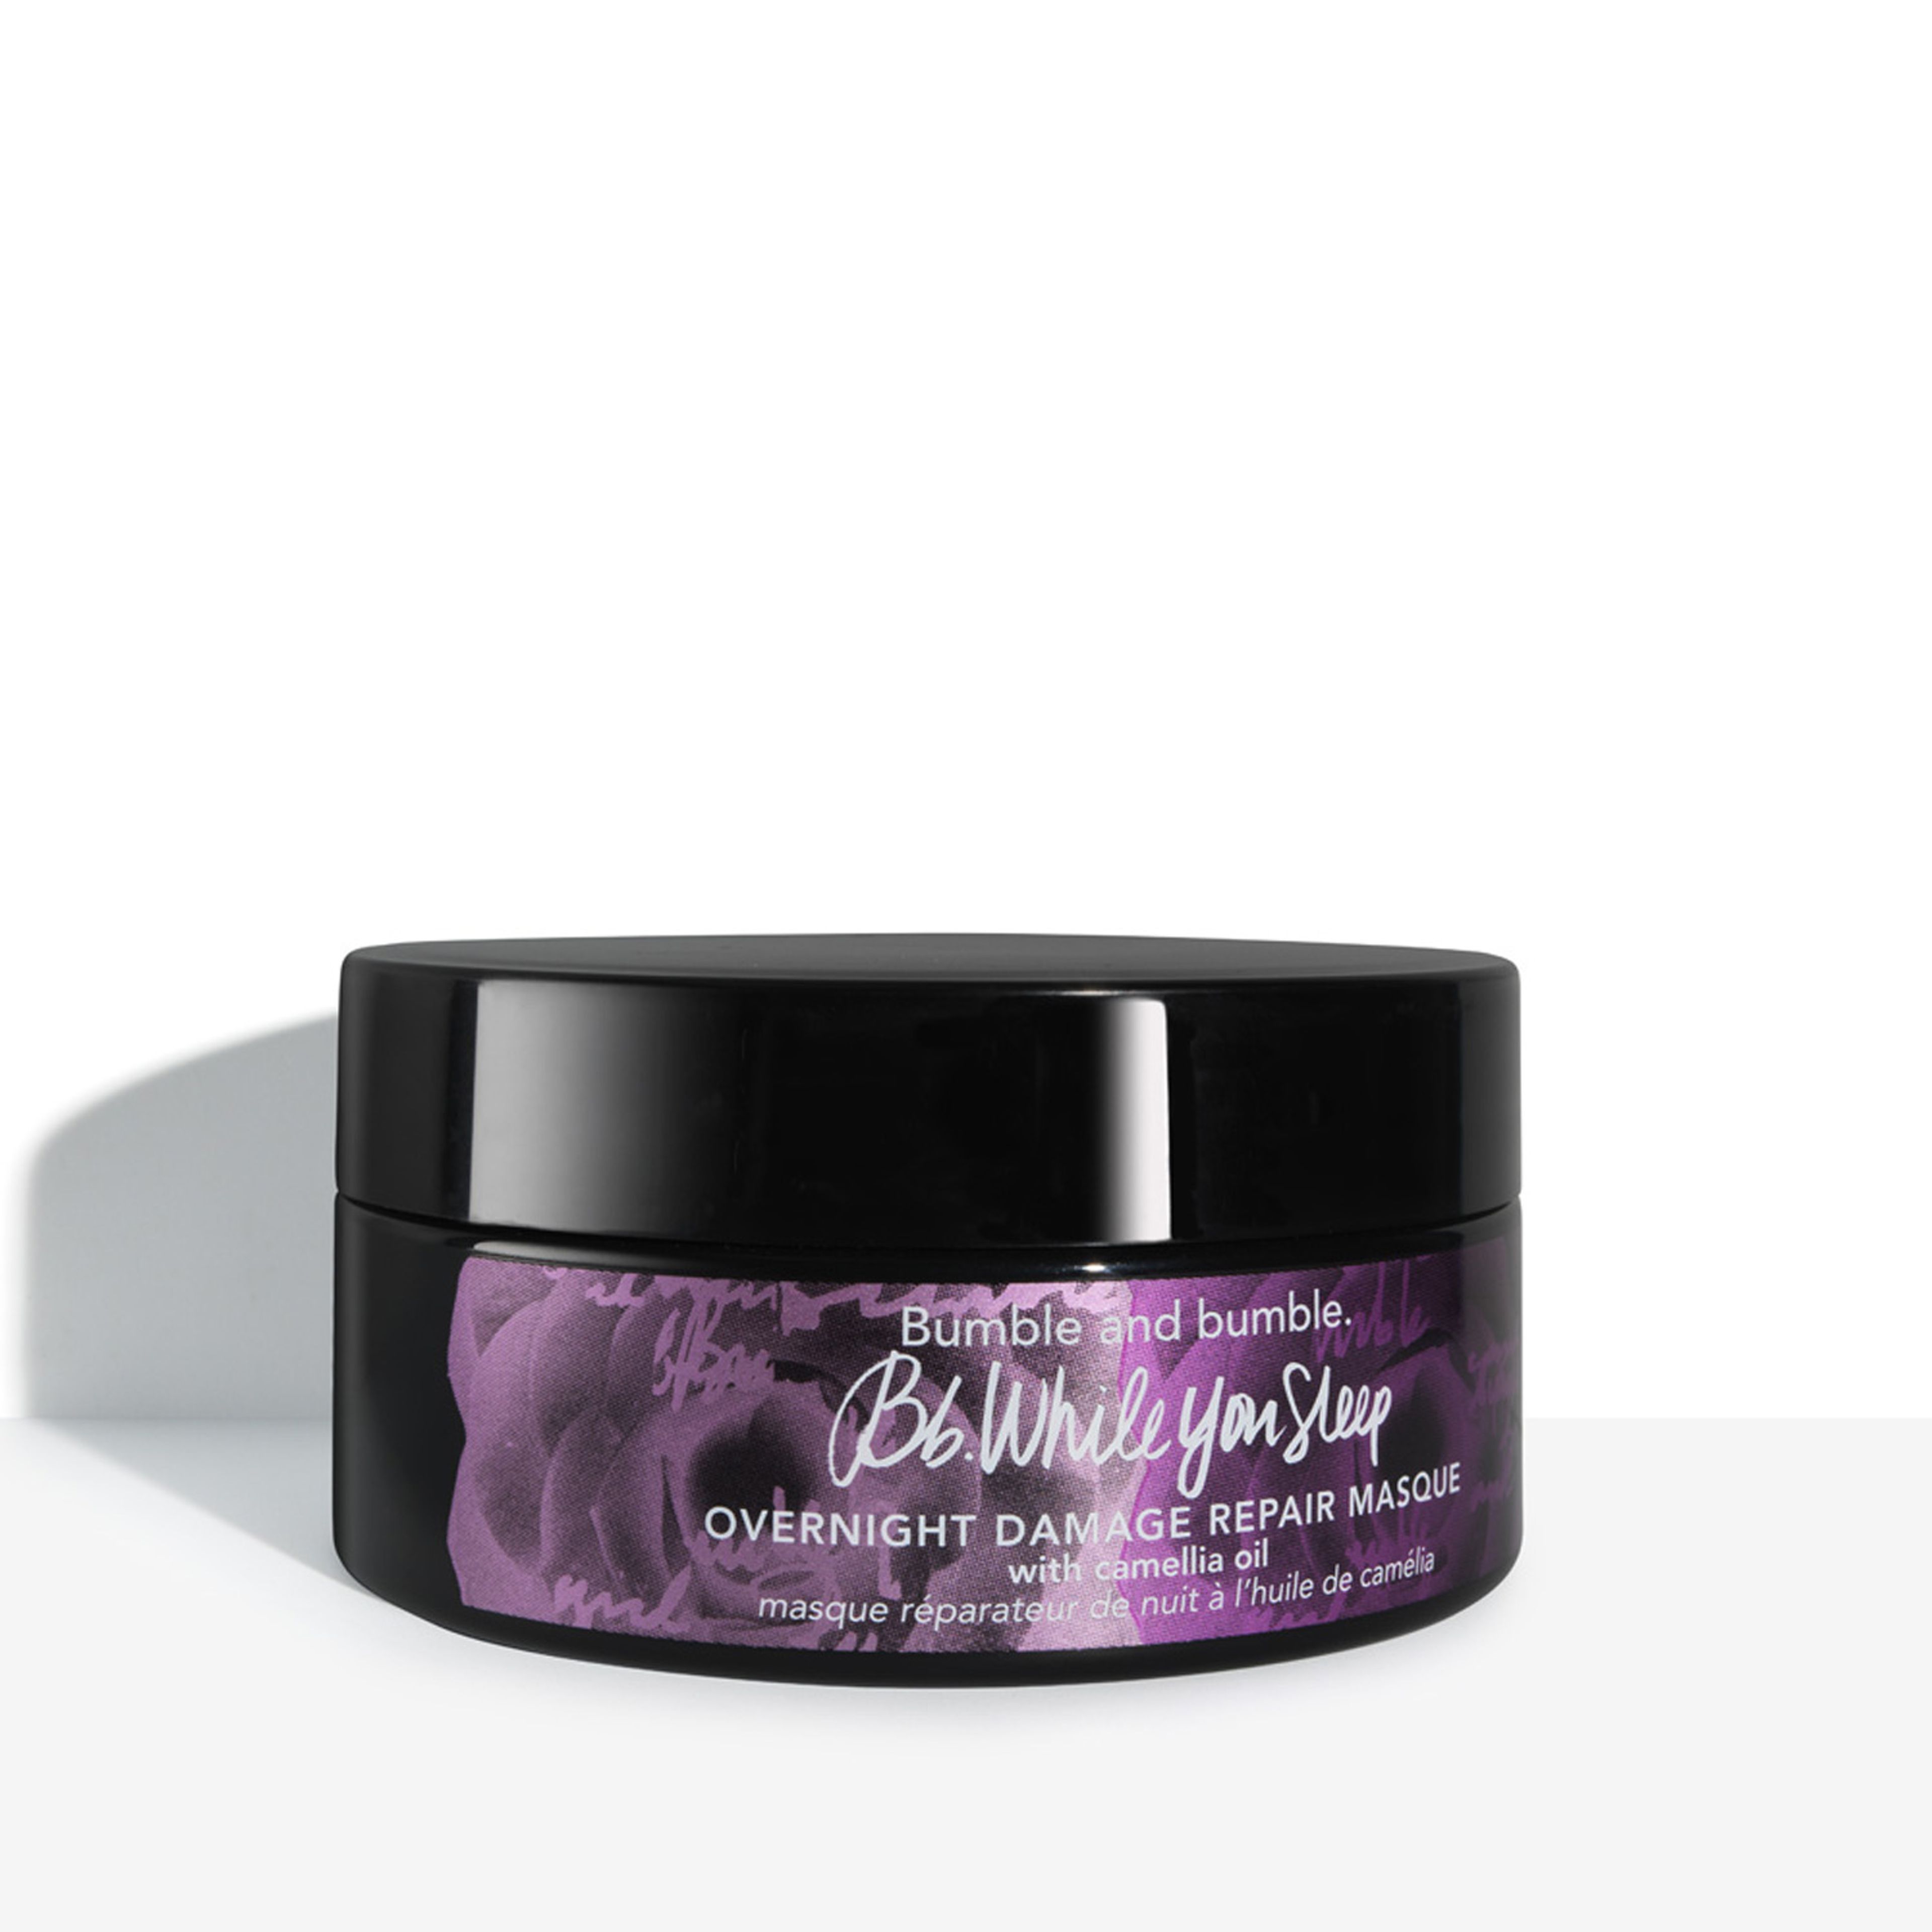 Bumble and bumble While You Sleep Overnight Damage Repair Masque 1